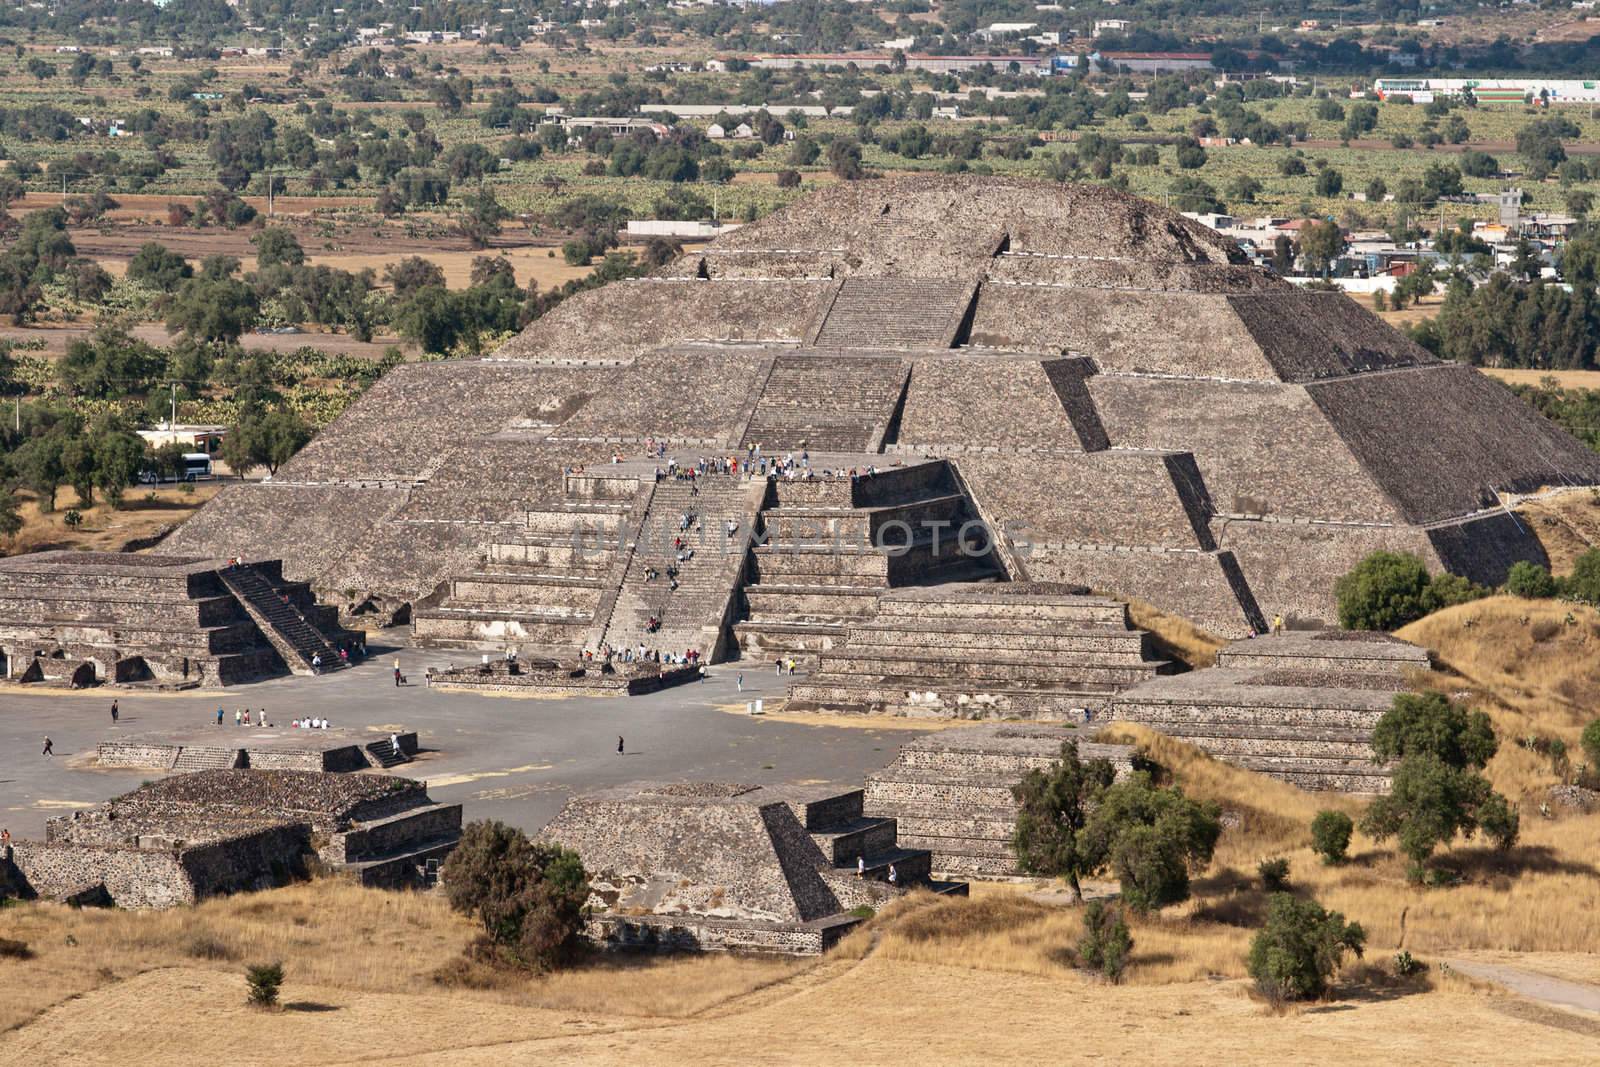 Pyramid of the Moon. Teotihuacan, Mexico by dimol